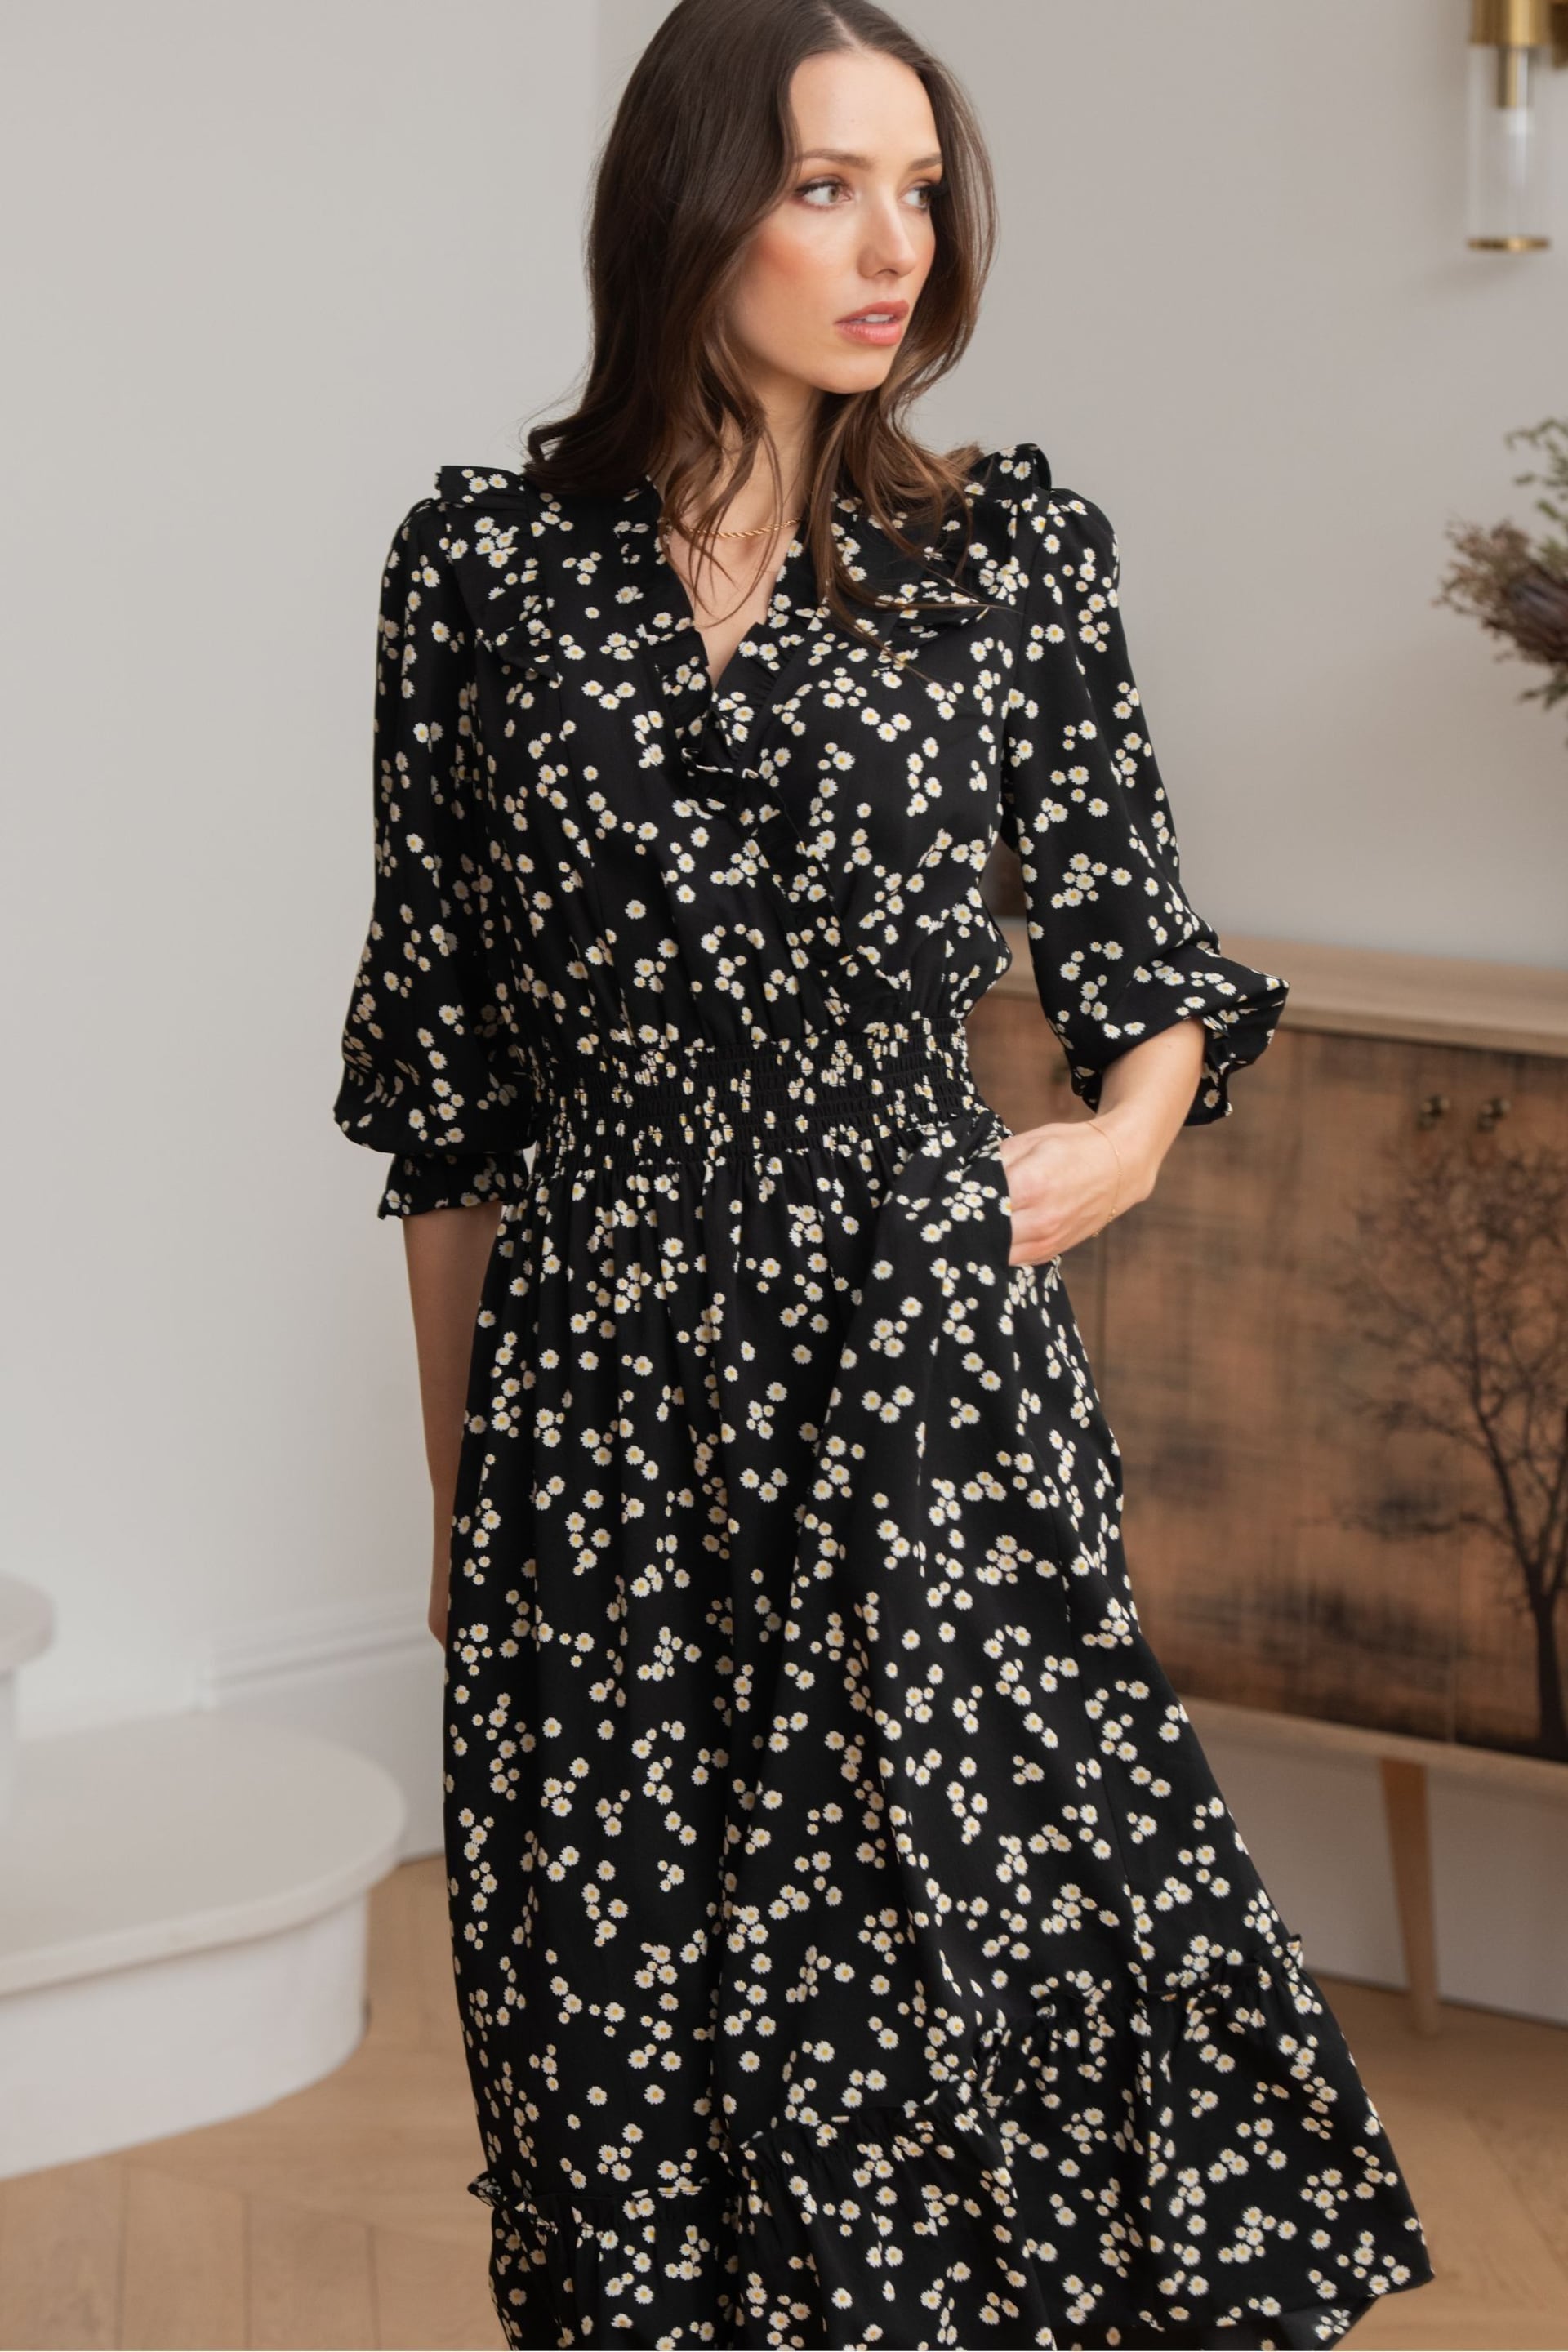 Pour Moi Black Daisy Print Maggie Recycled Dress - Image 2 of 4